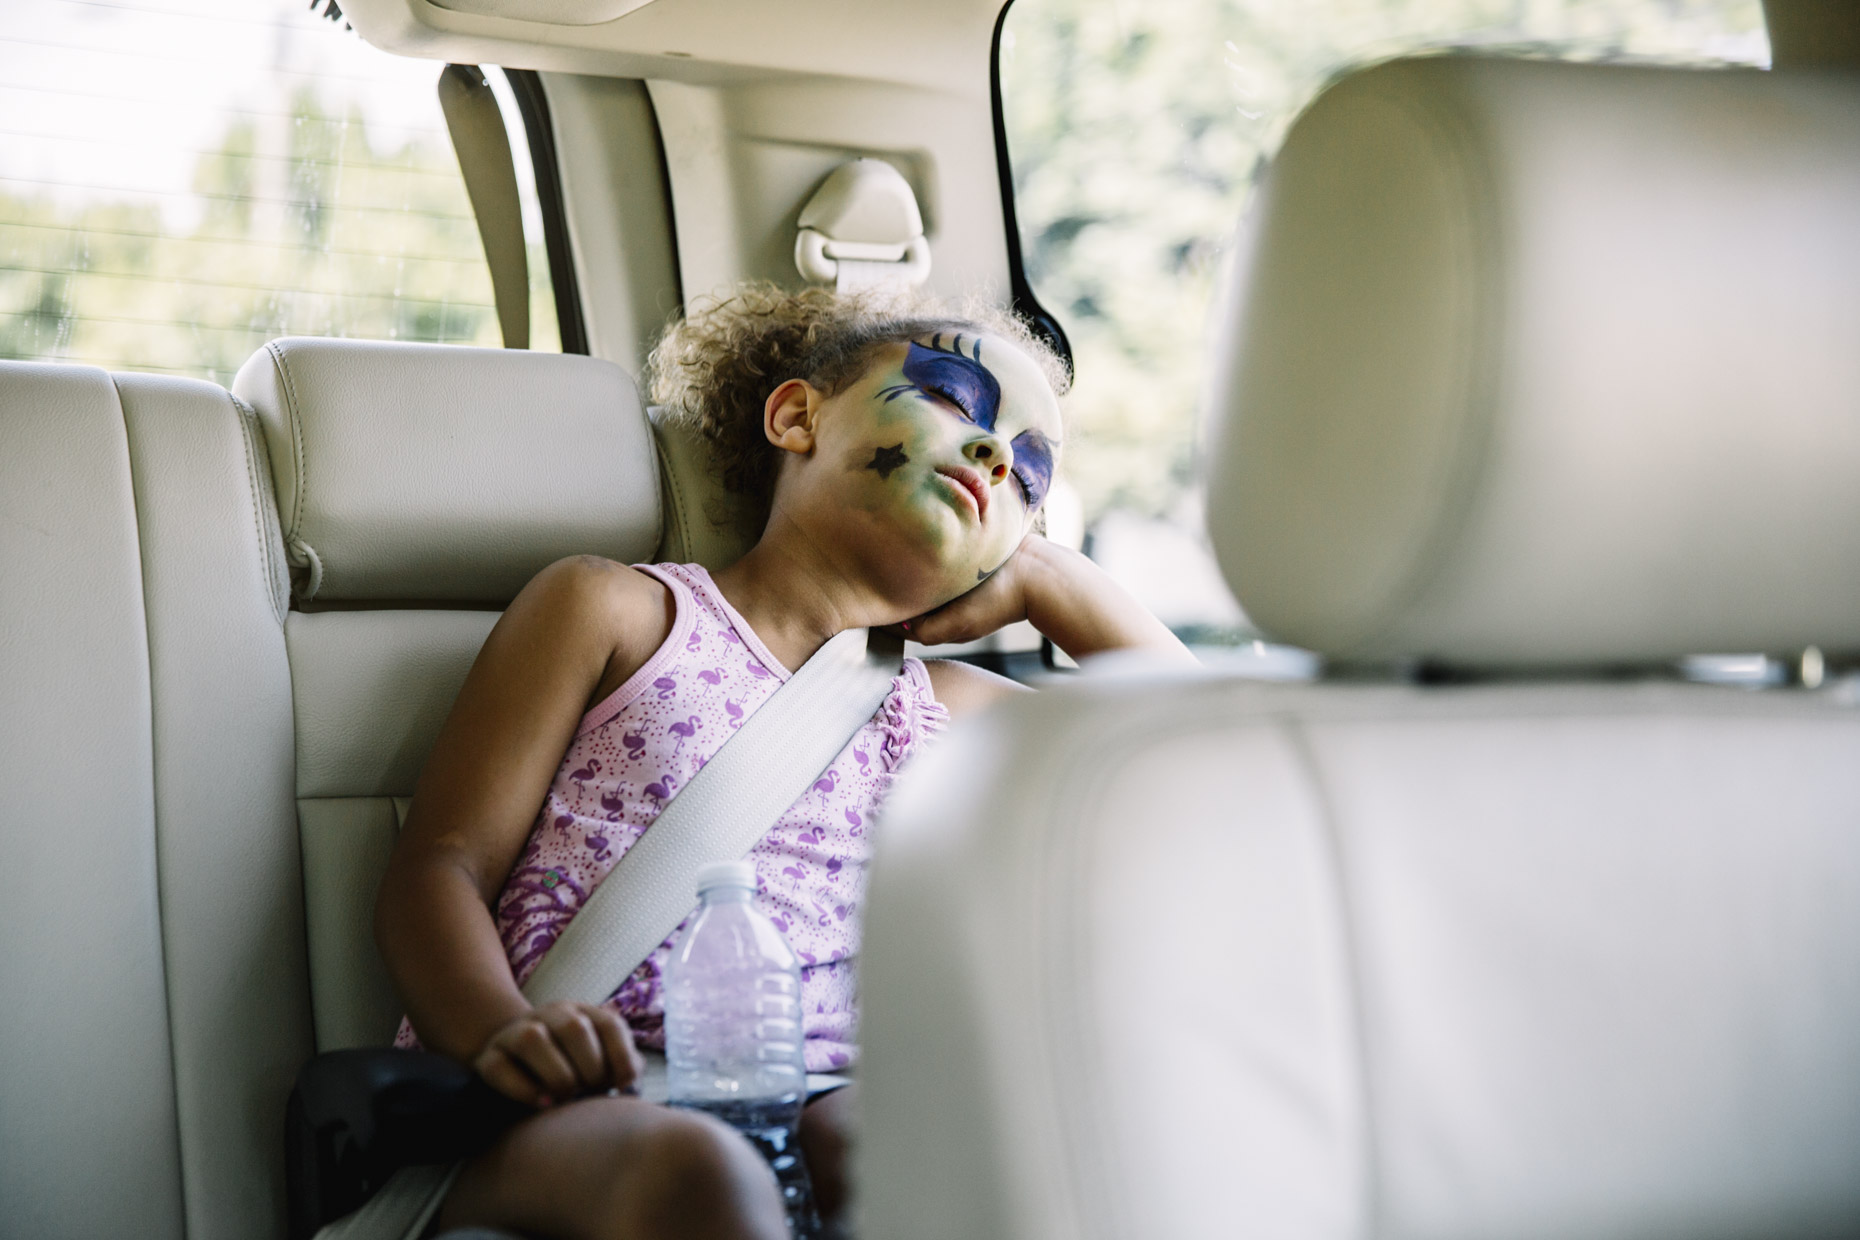 Girl with painted face sleeping in car seat